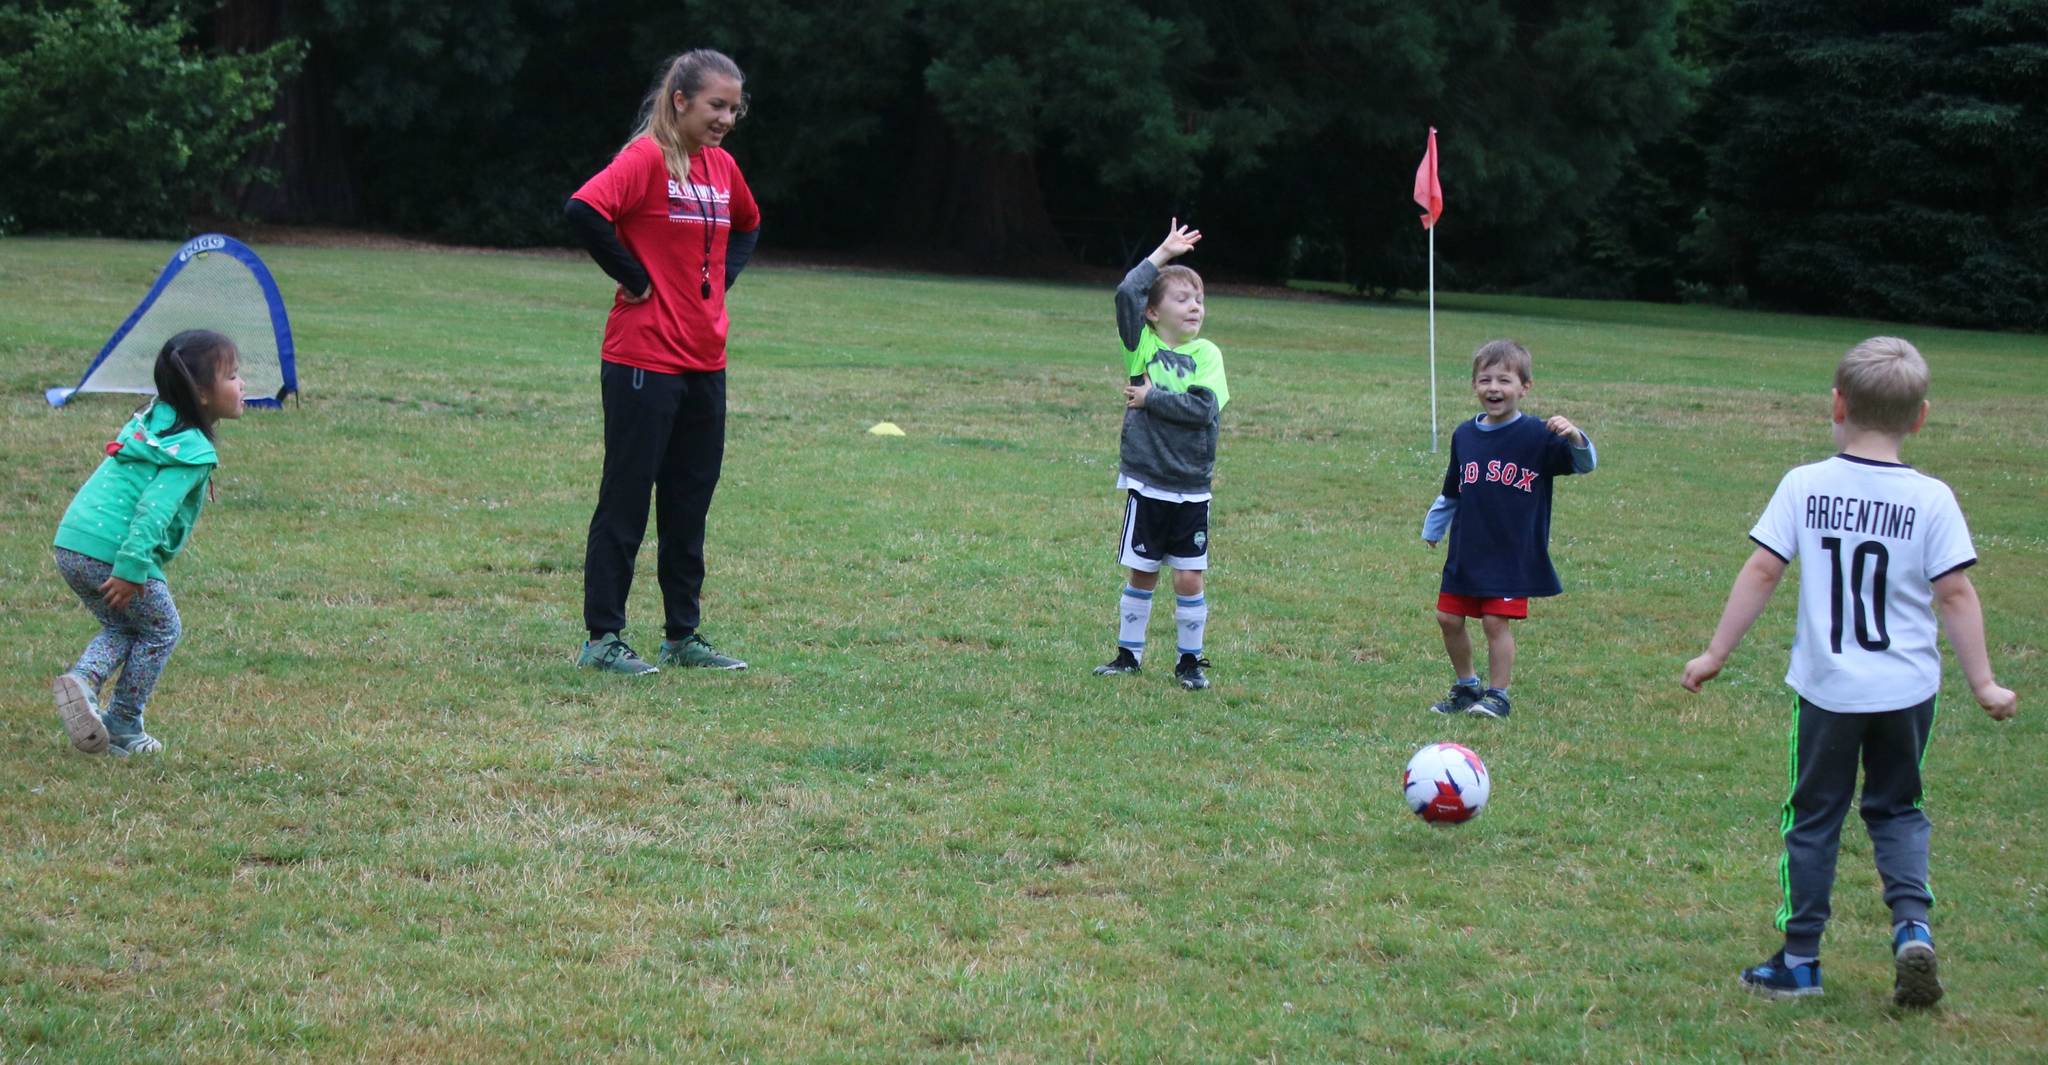 Amber Powers, director and coach of the Kenmore Skyhawks Sports youth soccer camp, enjoys her time with the kids on July 17 at Rhododendron Park. Andy Nystrom/ staff photo